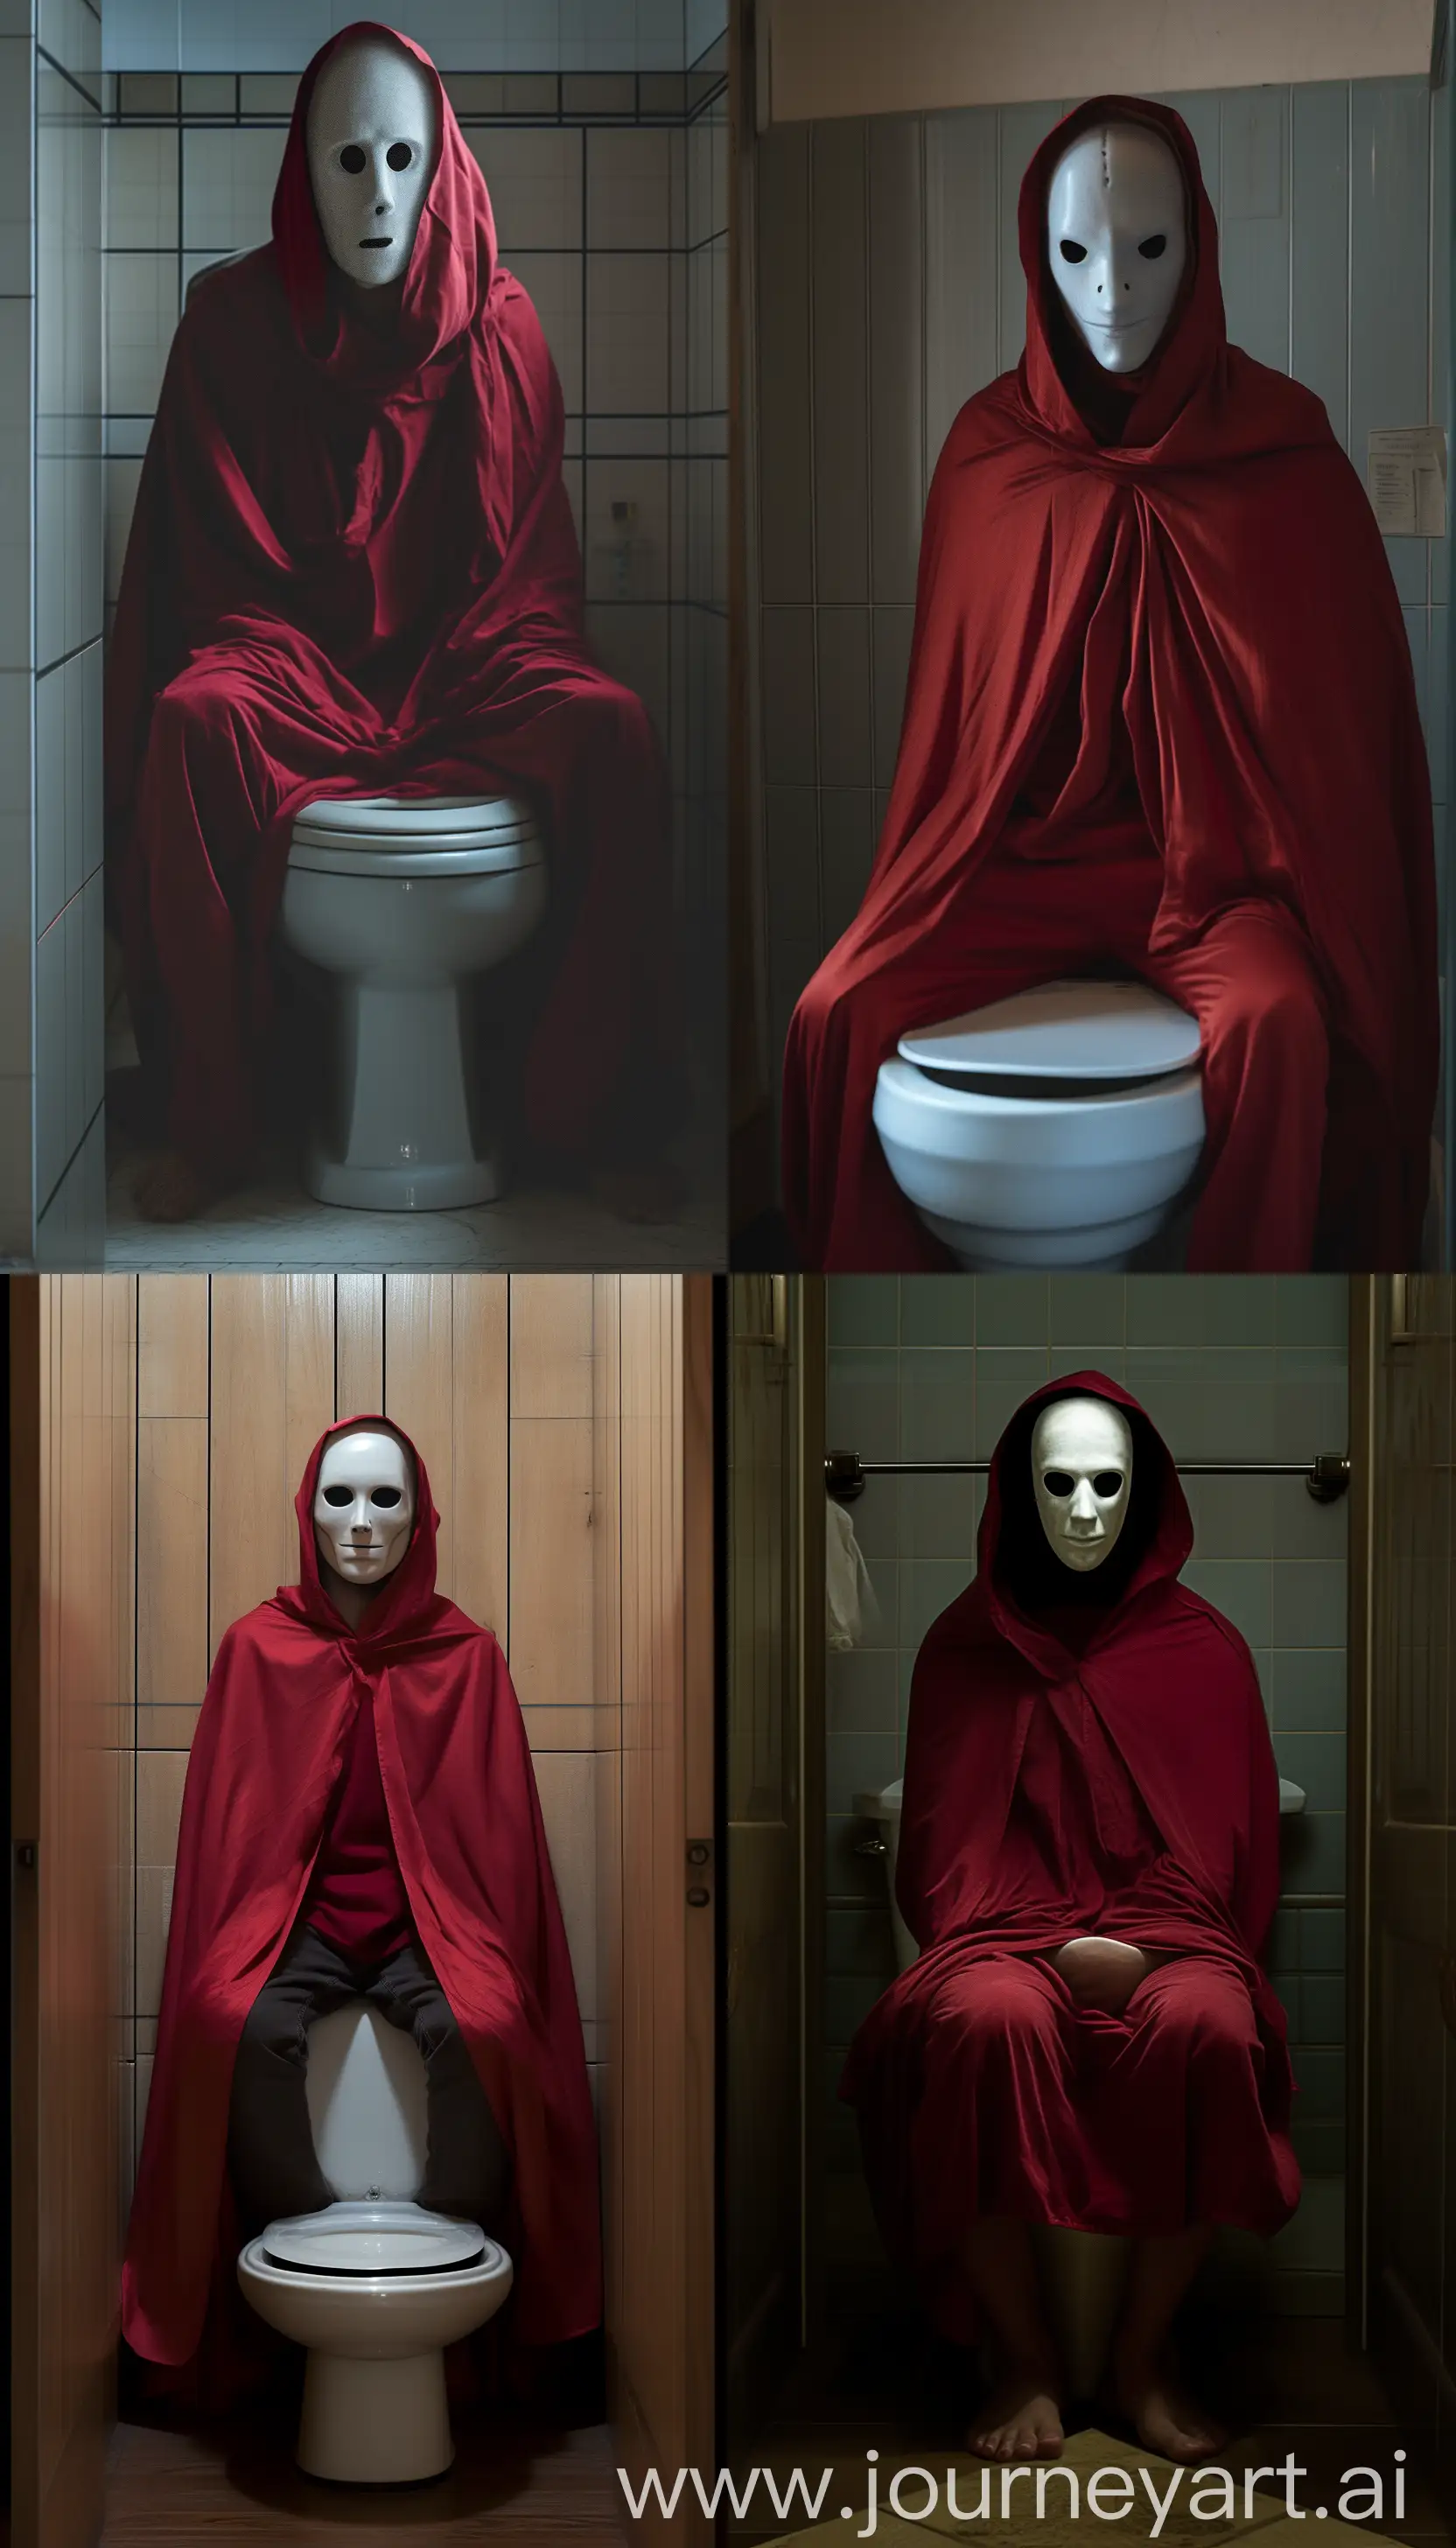 Akamanto-Mysterious-Figure-in-Red-Cloak-on-Toilet